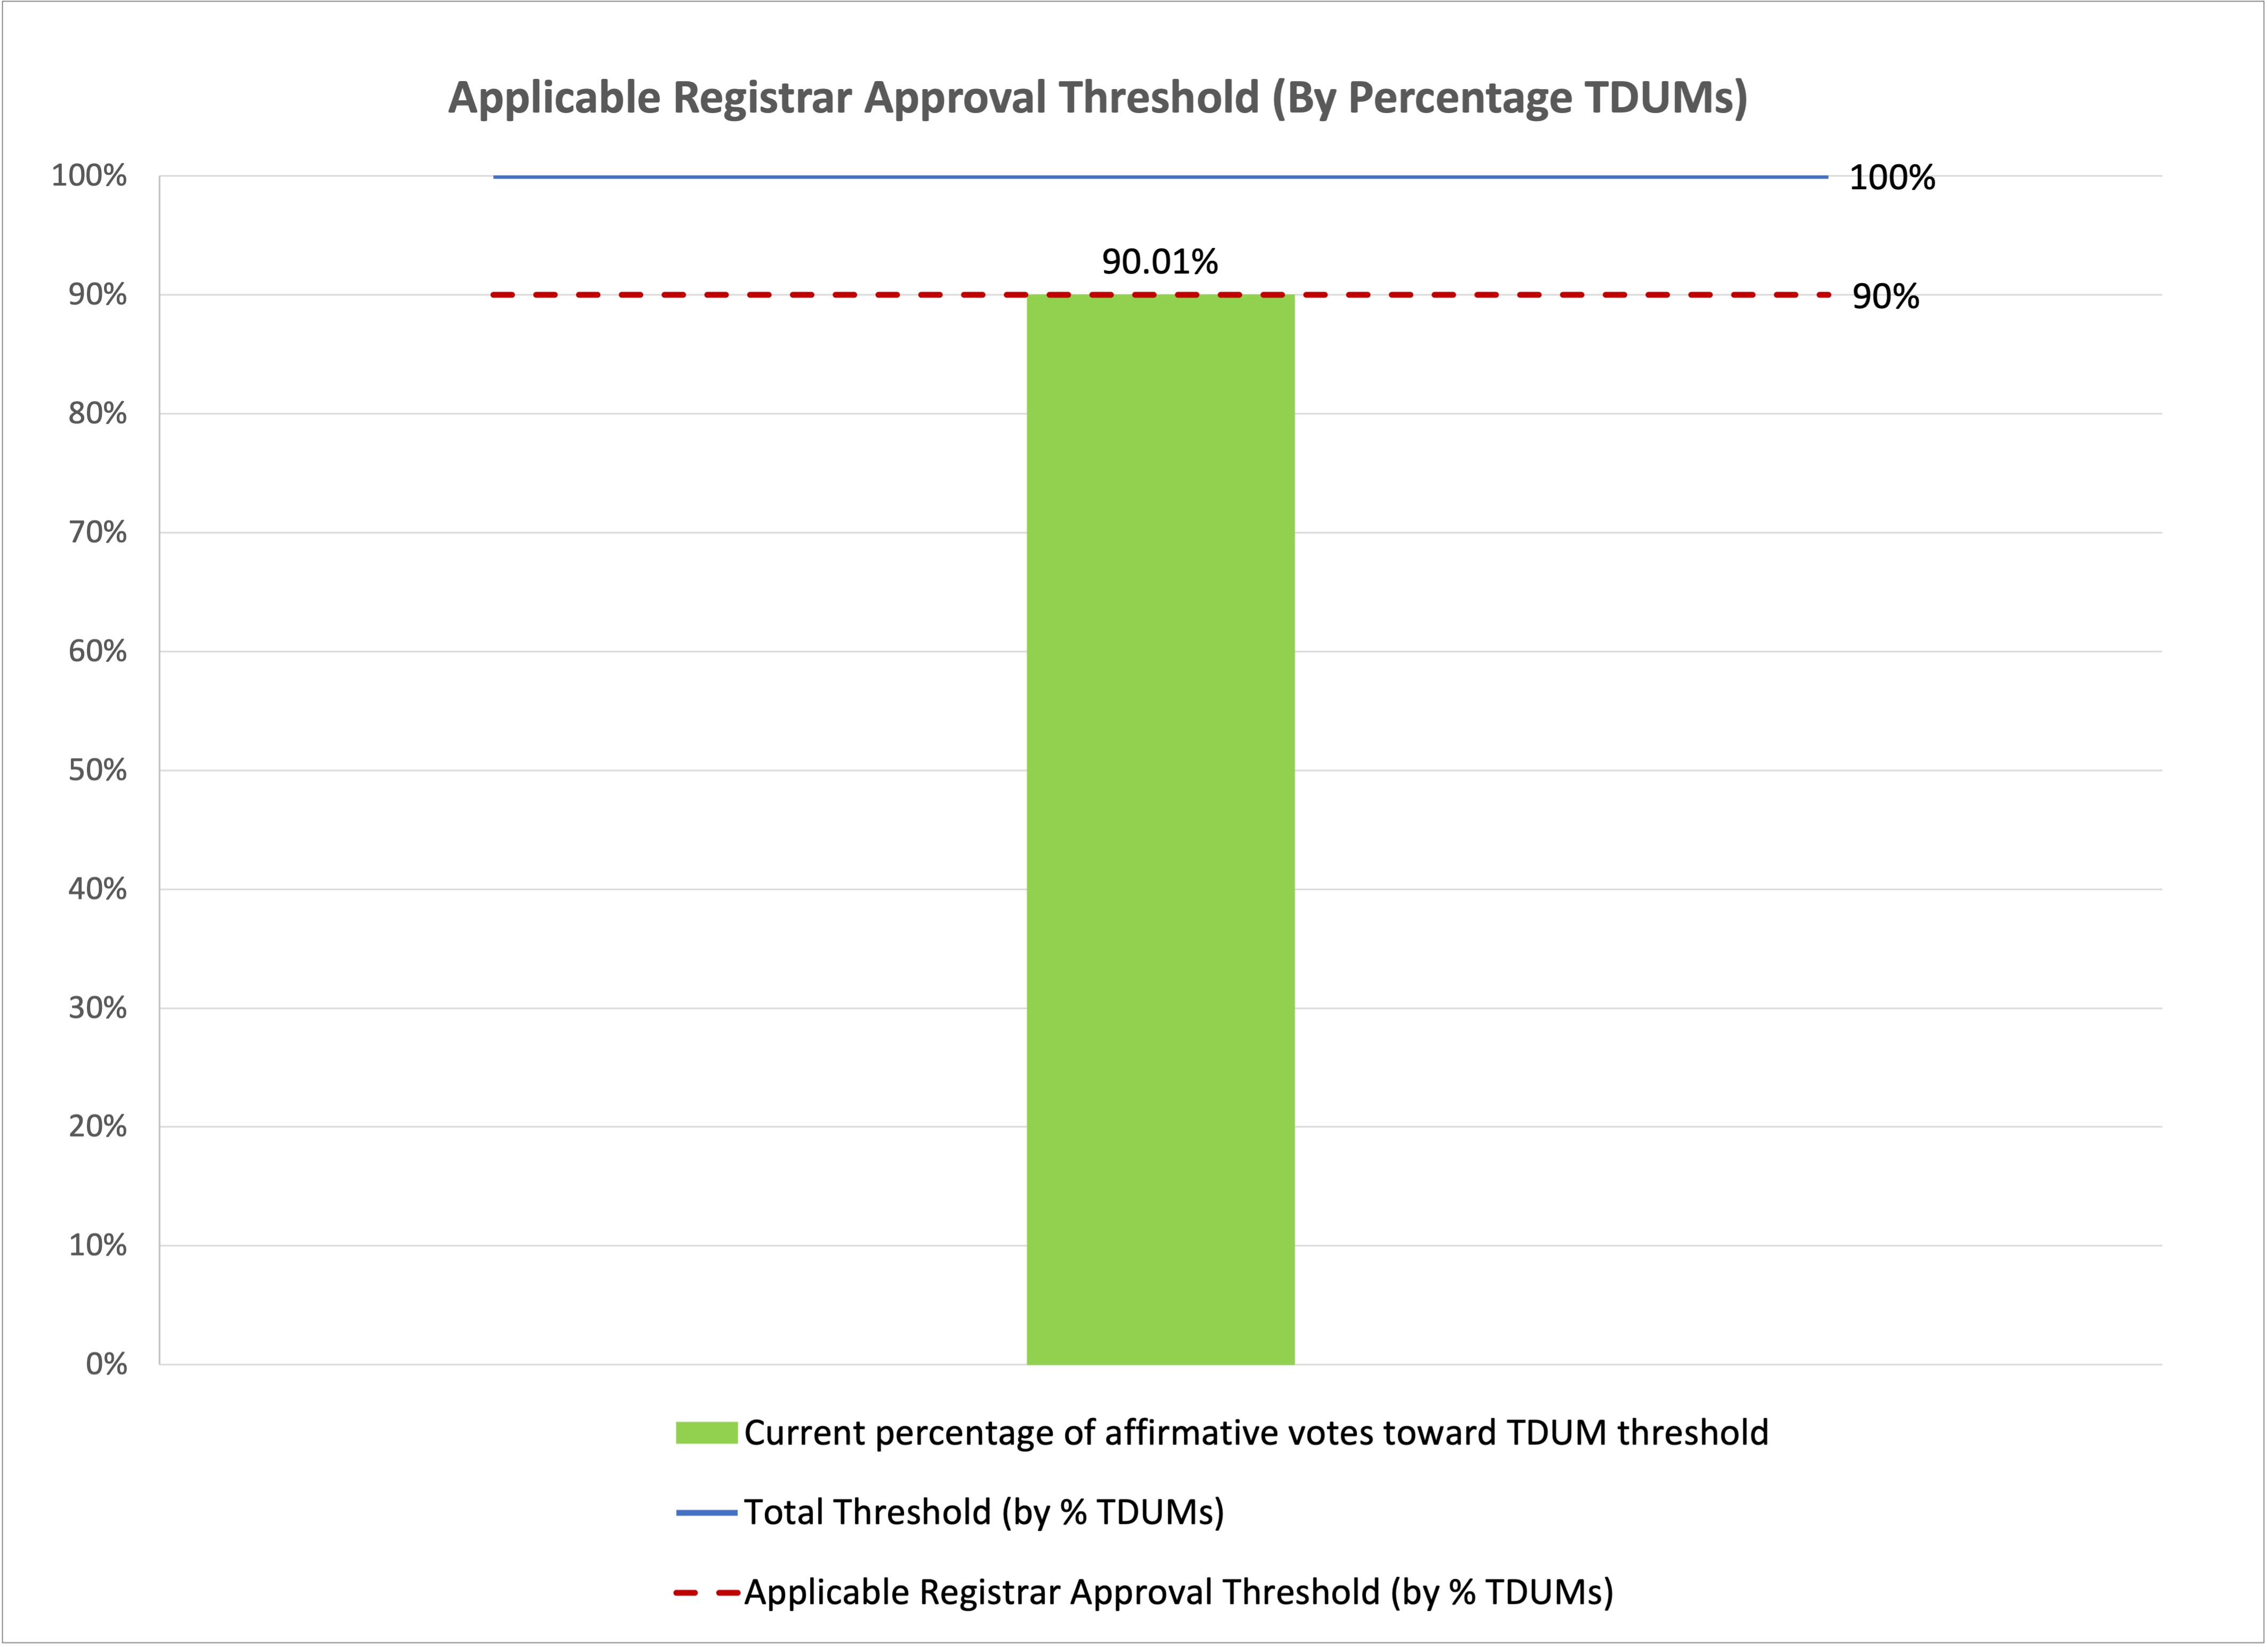 Bar chart of the progress of the vote towards meeting the percentage of total domain names under management (TDUMs) threshold for Applicable Registrars. The TDUMs approval threshold is 90%, with current affirmative votes towards the threshold at 90.01%